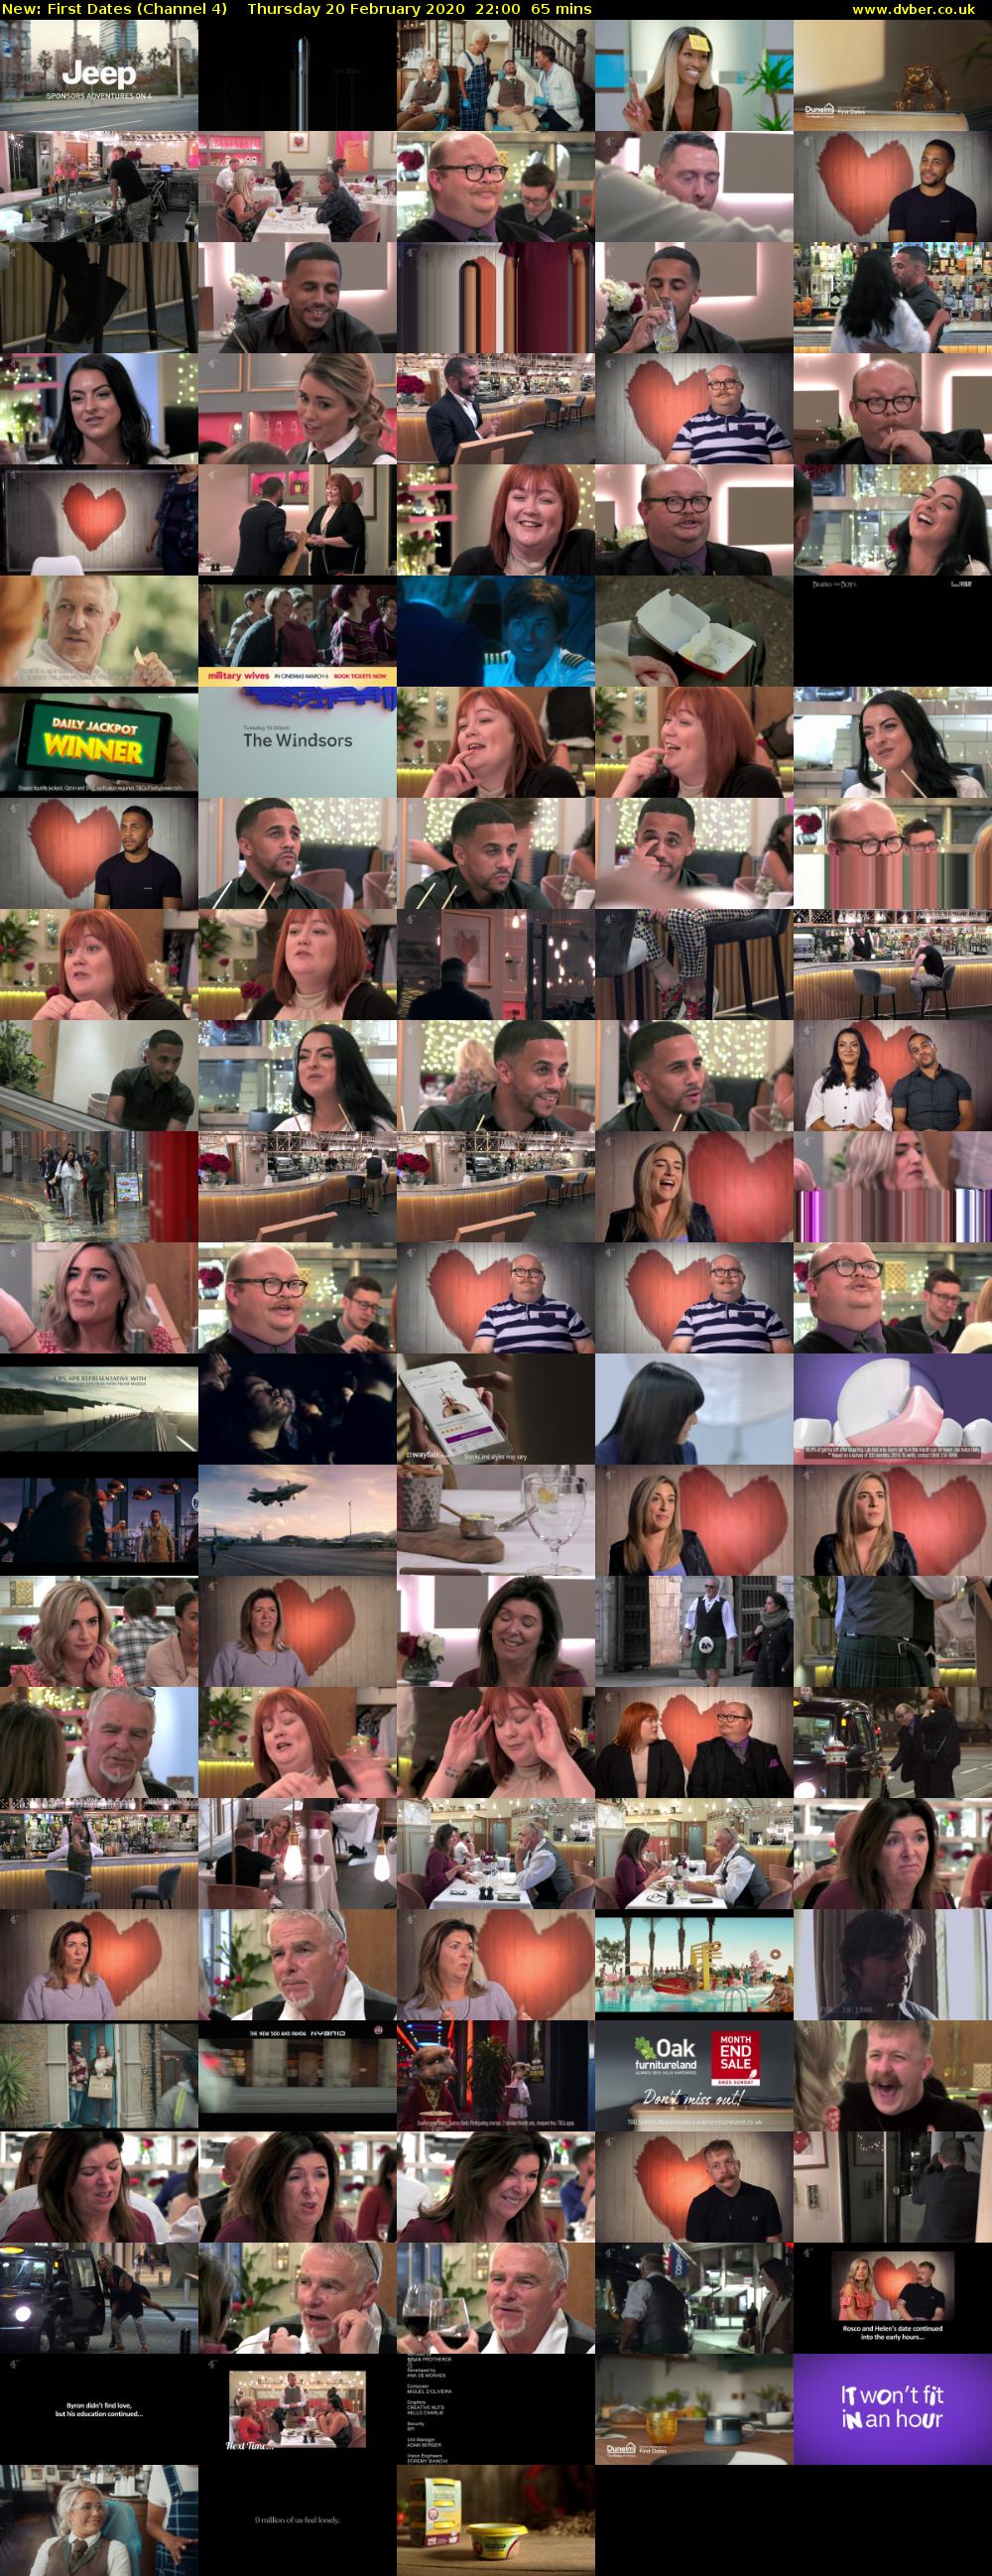 First Dates (Channel 4) Thursday 20 February 2020 22:00 - 23:05